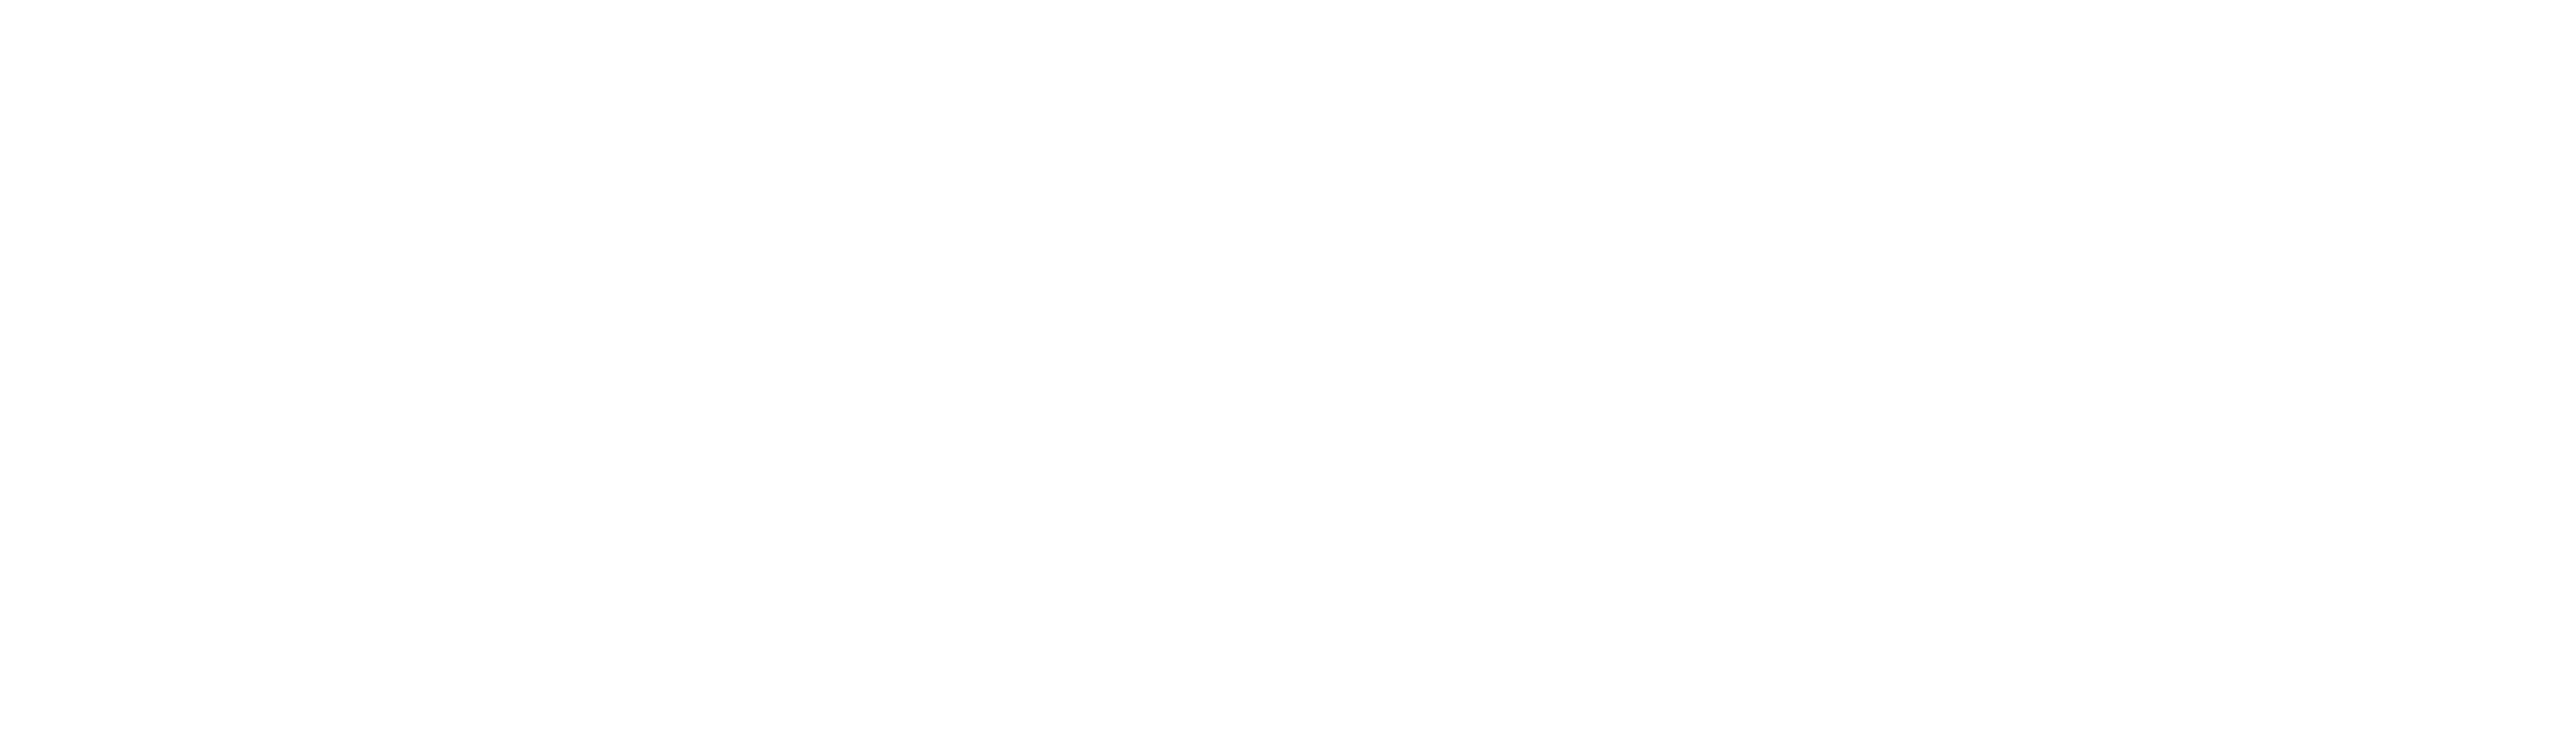 Climagraphy